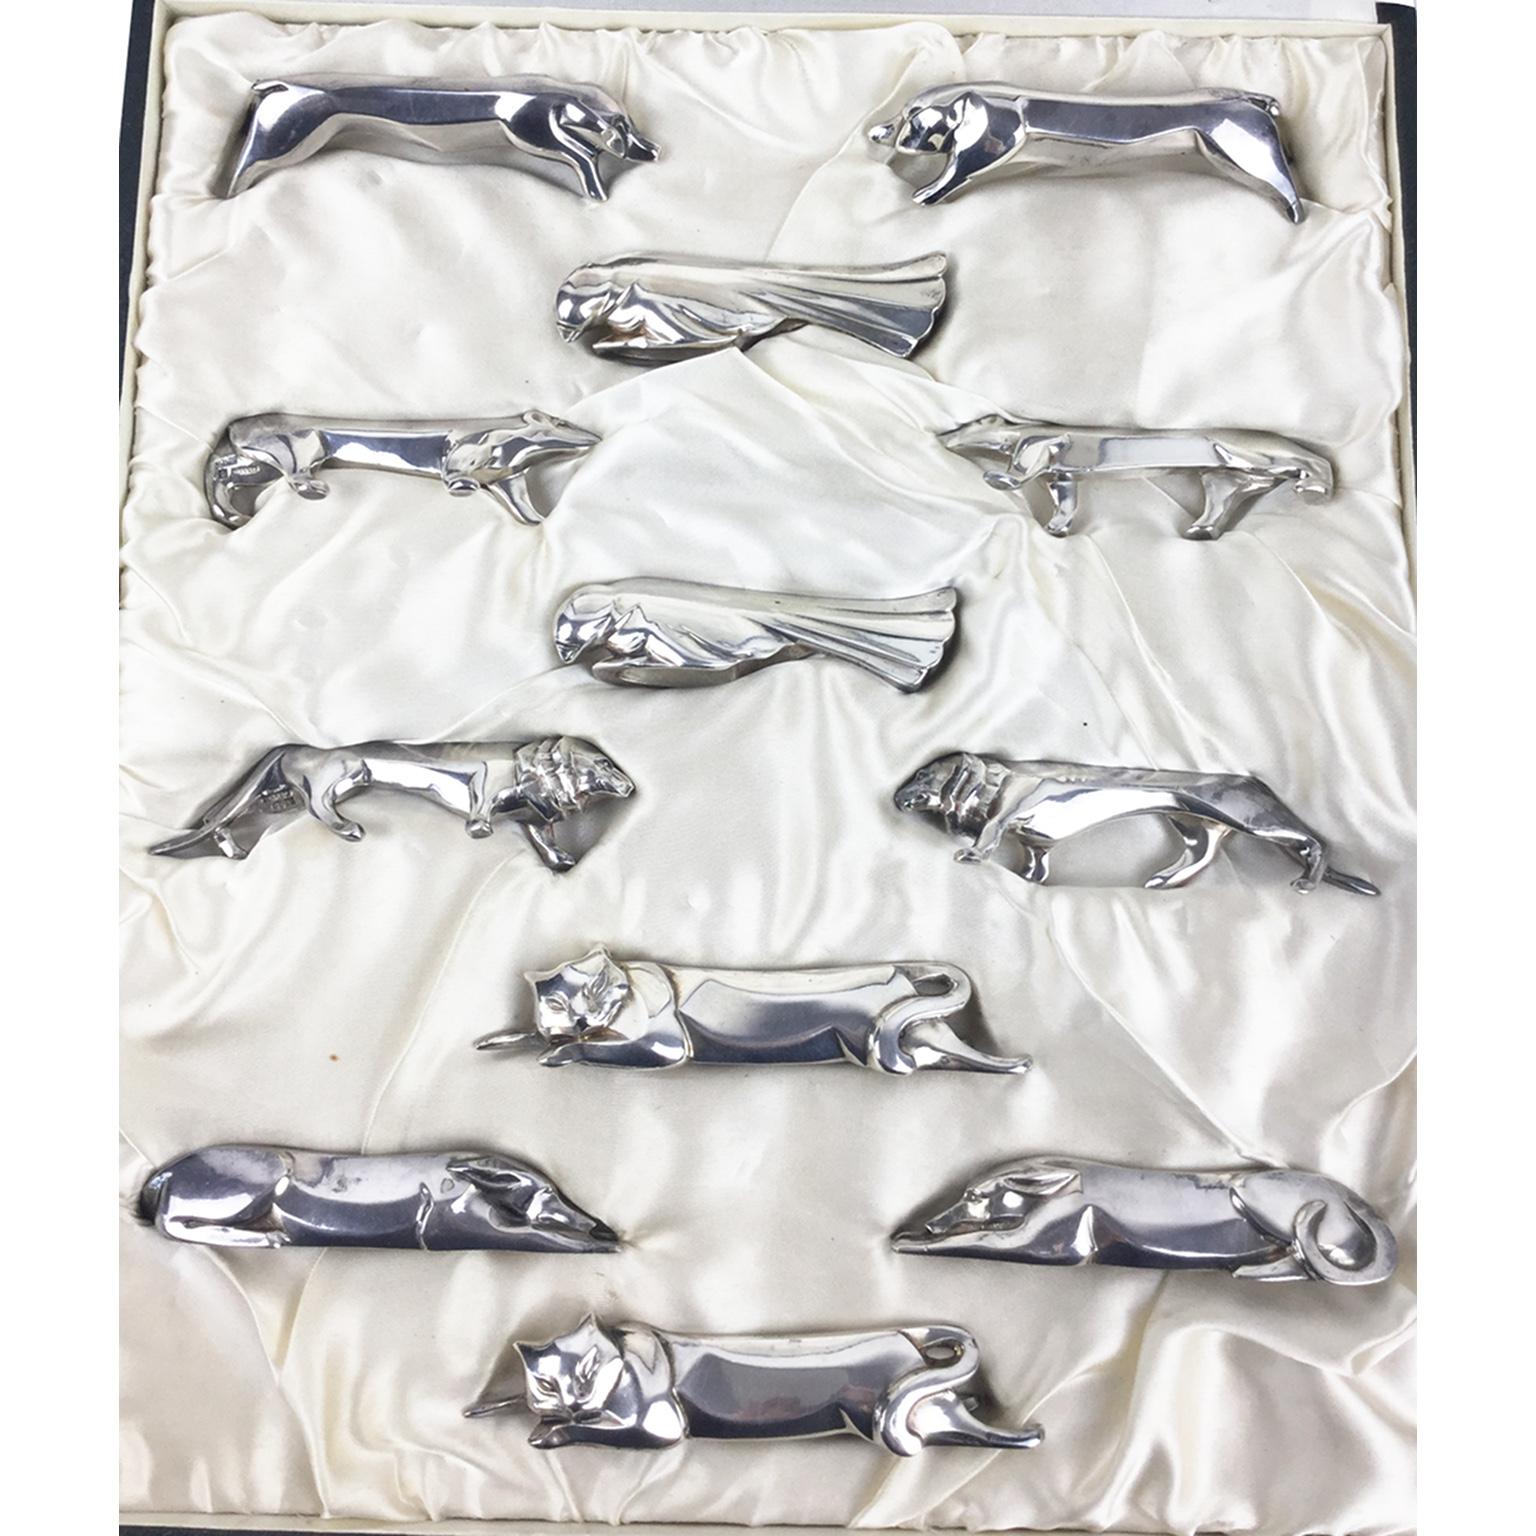 Set of 12 Animals silver plated knife Rests by Edouard-Marcel Sandoz for the French well-known silversmith Christofle 
Nicely presented in its own original box.